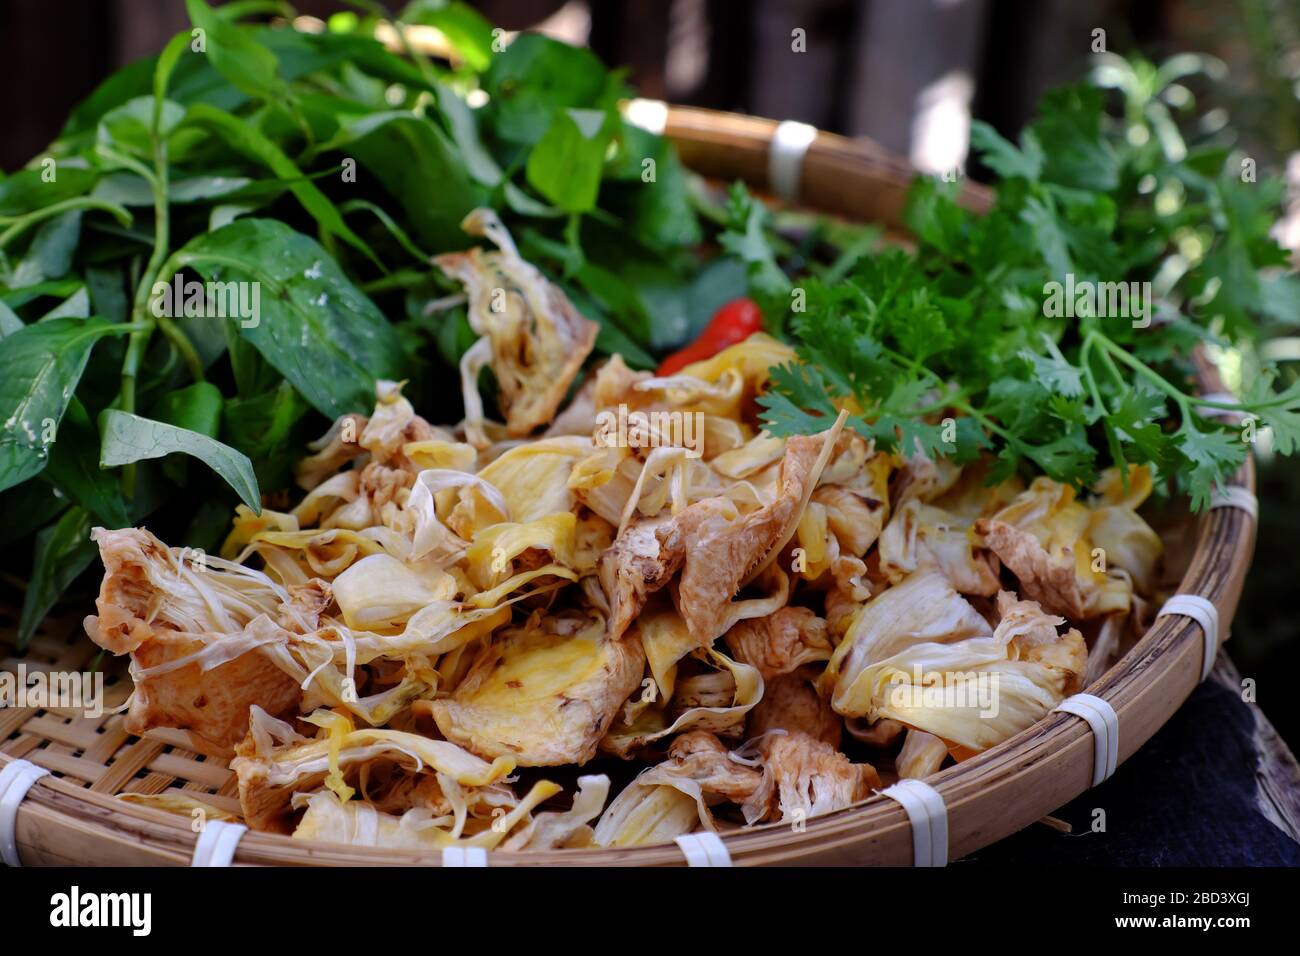 High view tray raw material of homemade Vietnamese vegan food for daily meal, edible fibre of breadfruit cook dried with sauce and laksa leaves, delic Stock Photo